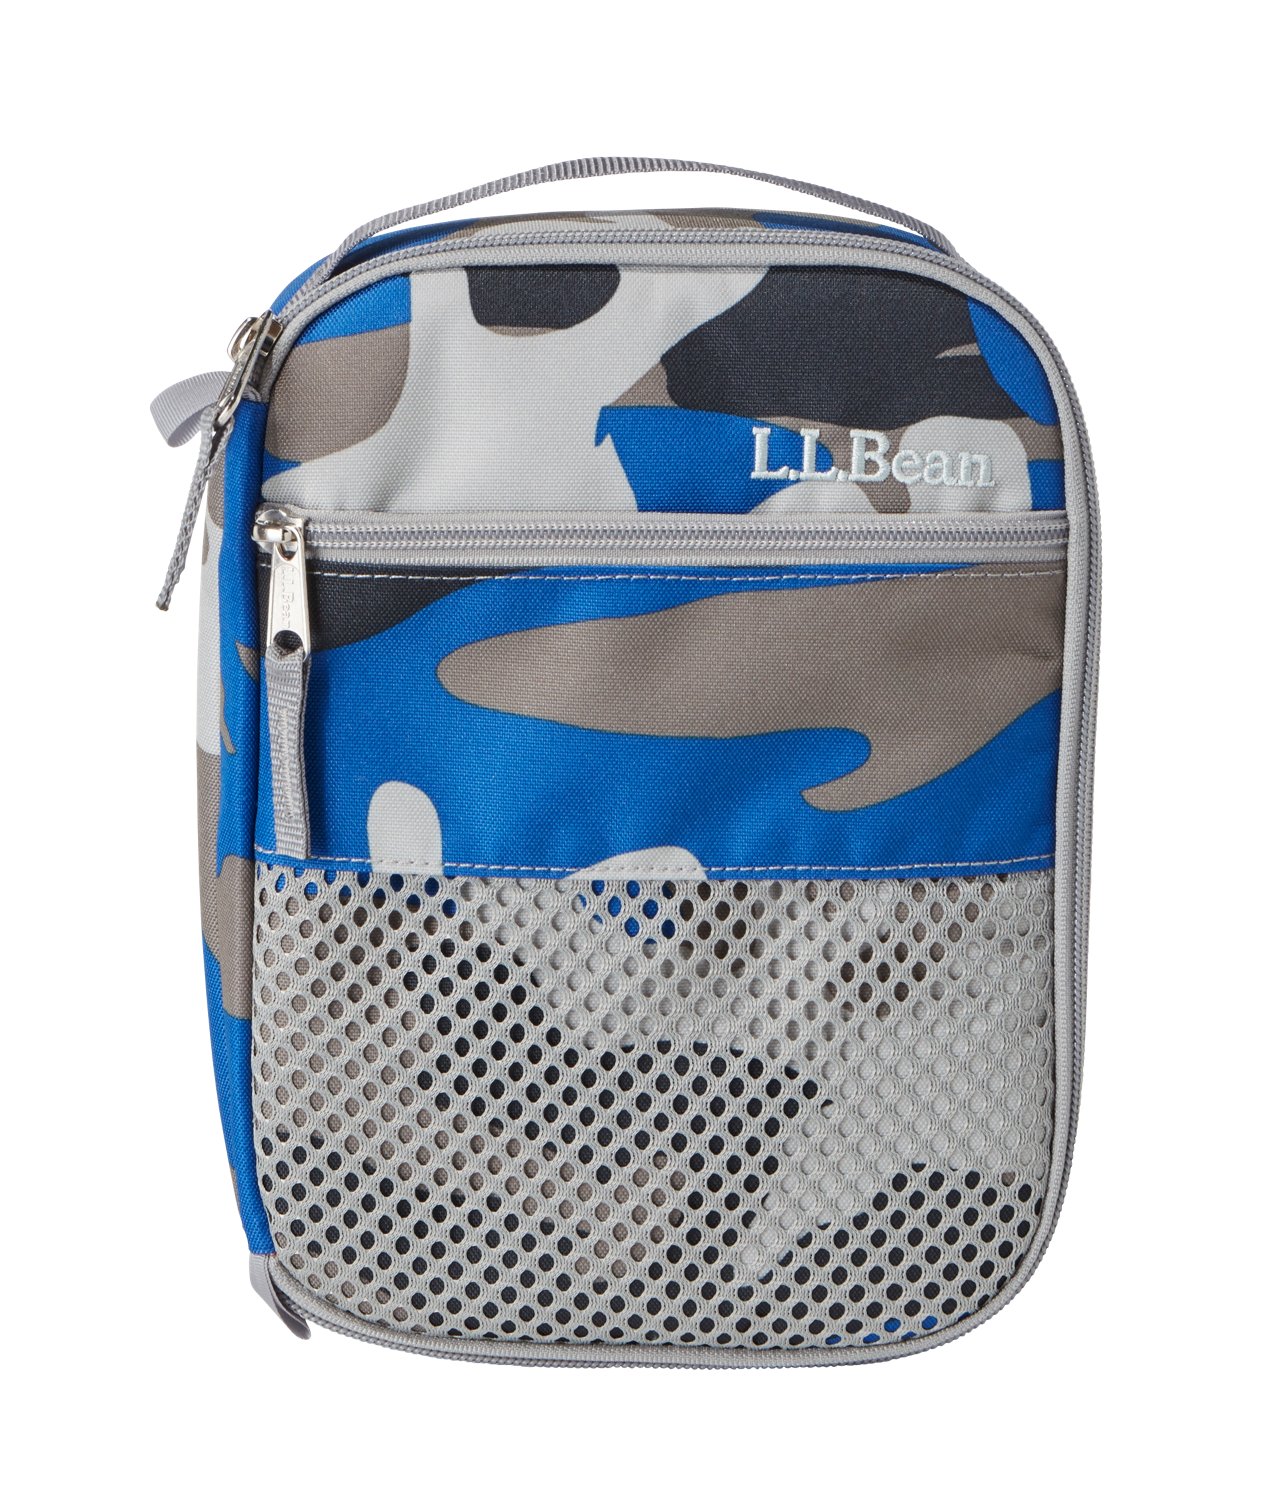 https://academy.scene7.com/is/image/academy//coolers/llbean-camo-print-lunch-box-48786-blue/f92866ea9d374bf69fc226ca28fdb57a?$d-plp-product-image$